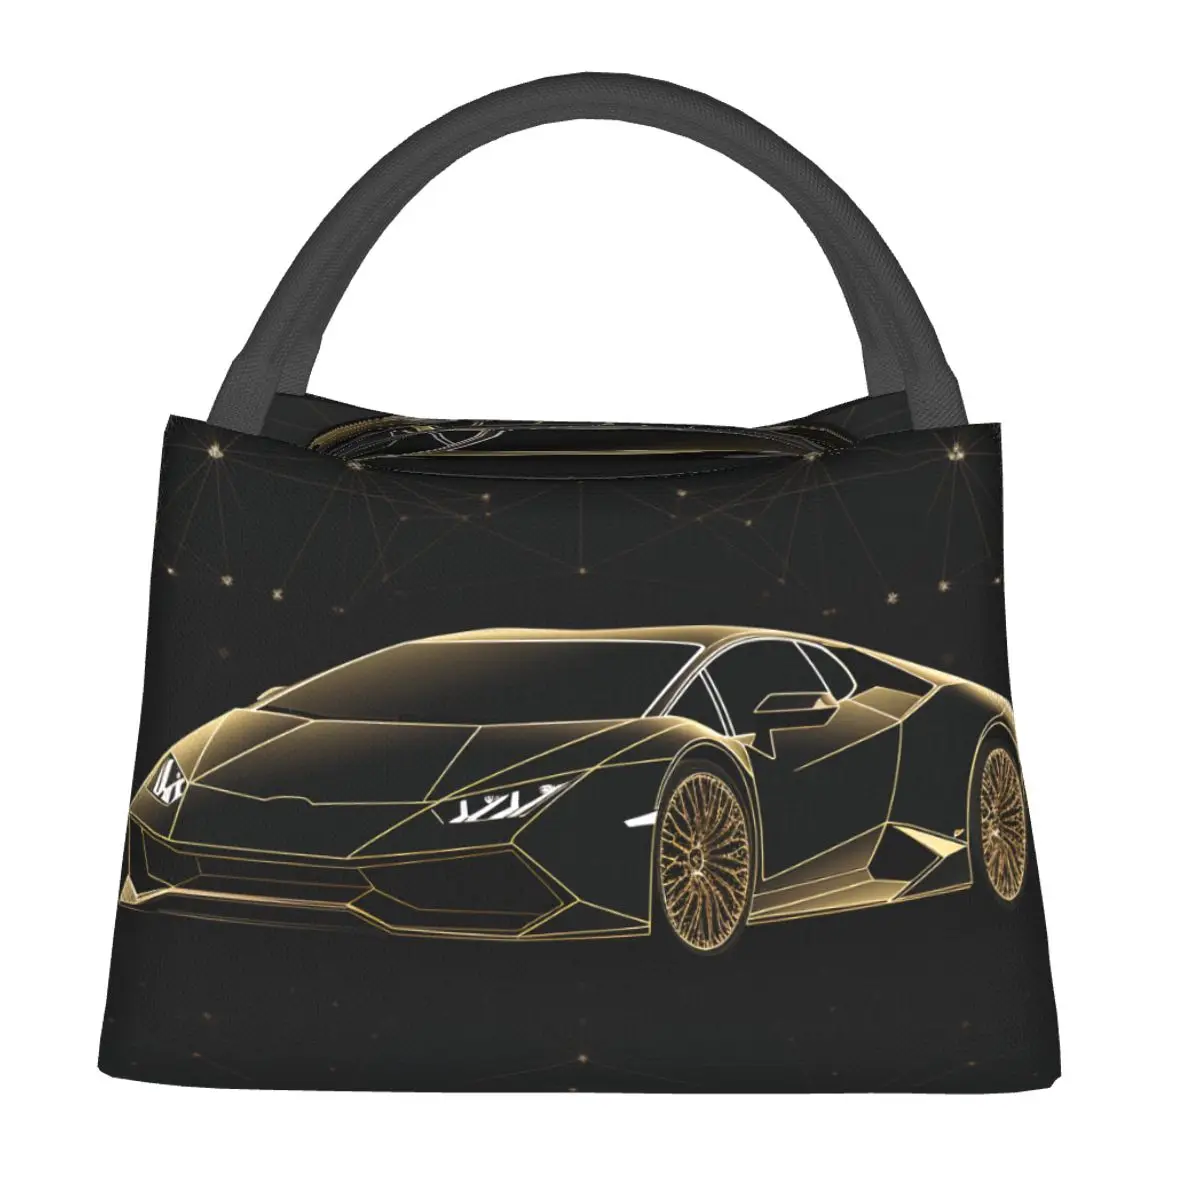 

Noble Sports Car Lunch Bag For Women Astro Geometry Print Lunch Box Outdoor Picnic Cooler Bag Waterproof Thermal Tote Handbags